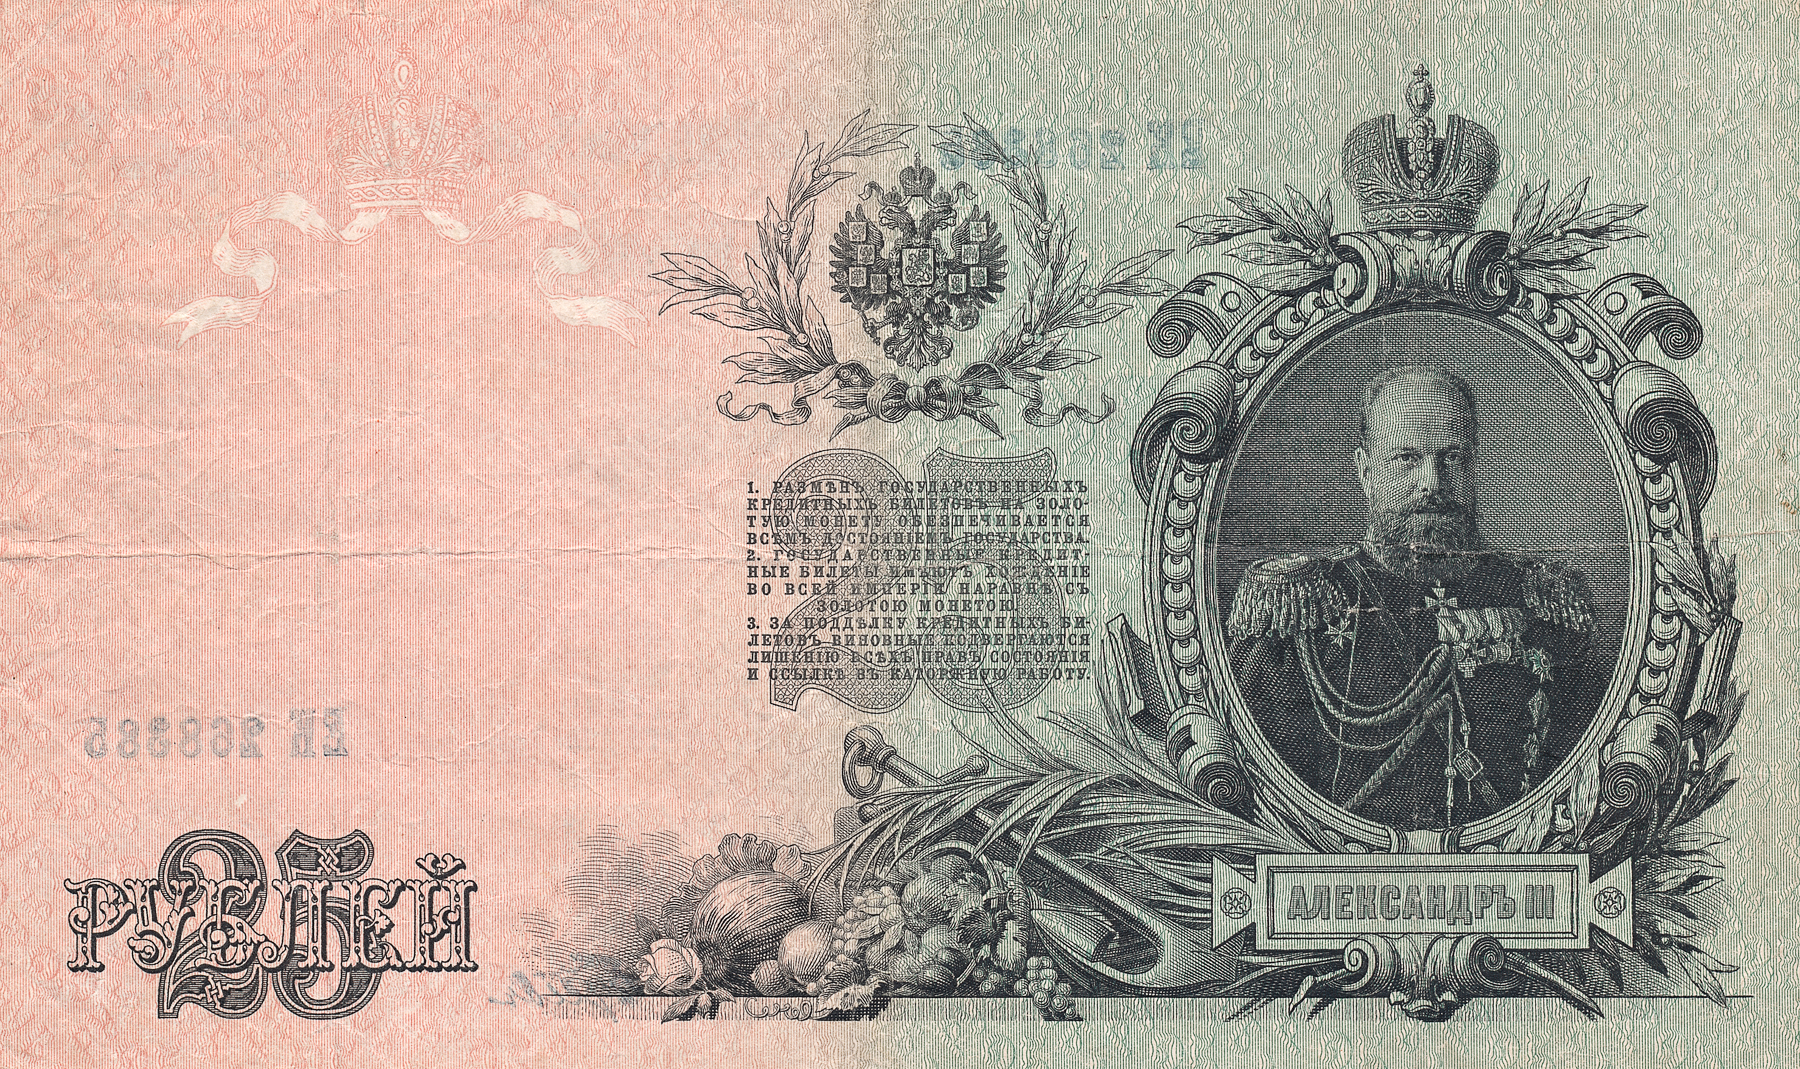 Antique banknote - imperial russia photo